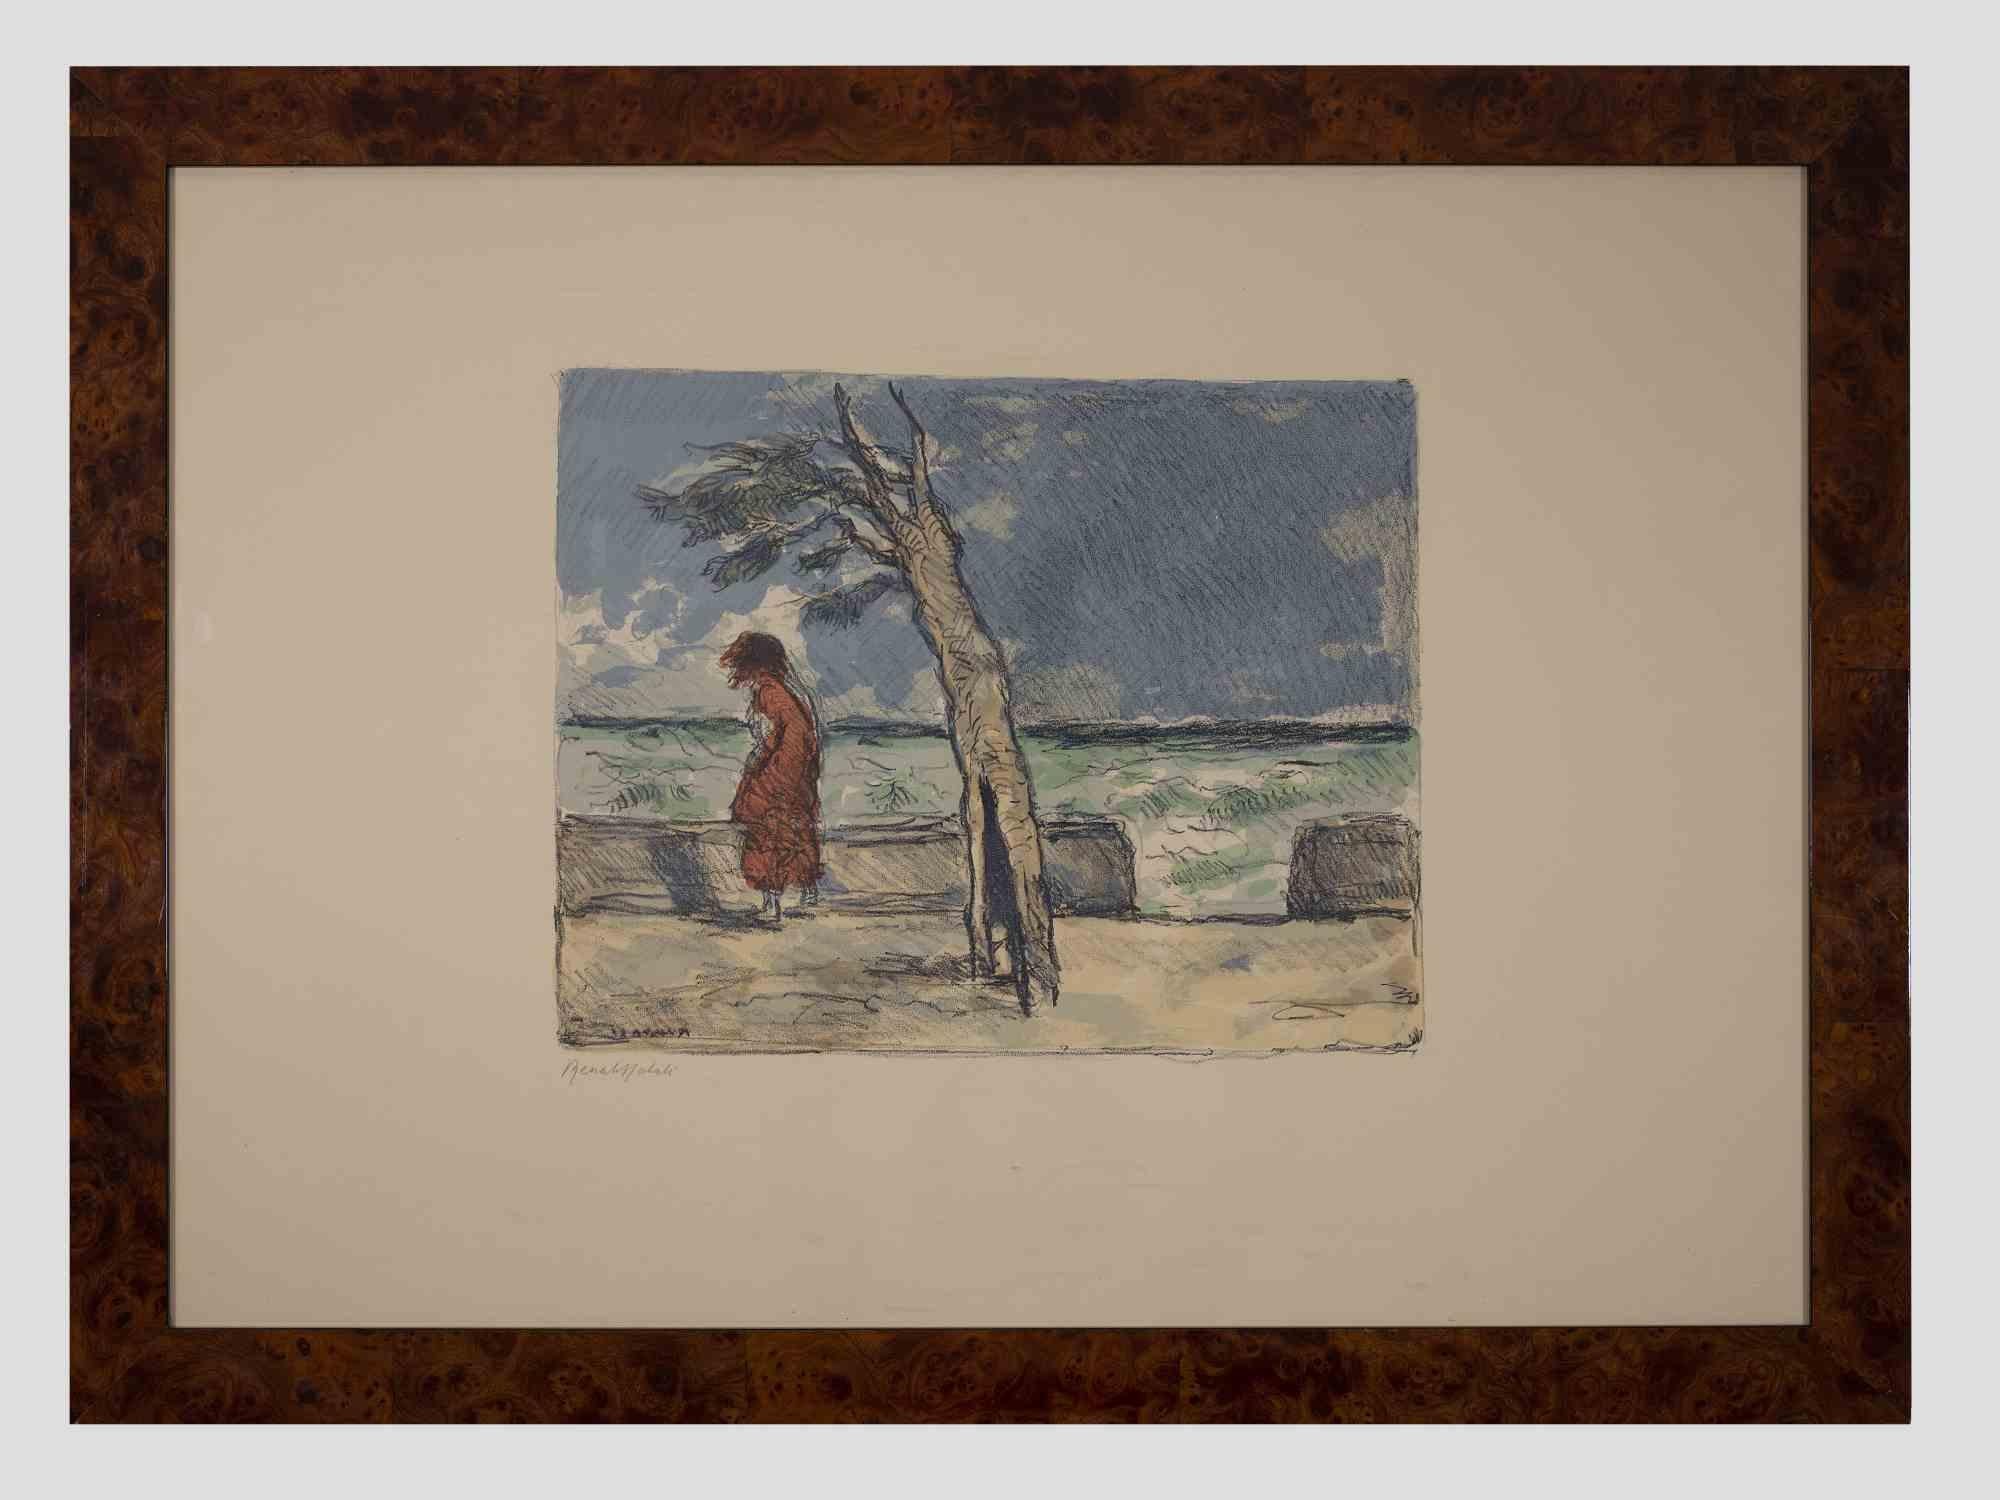 Seaside with a Figure is an original lithograph realized by the Italian artist Renato Natali in 1970s.

Hand signed in pencil lower left.

Good condition (light spots on the sheet).